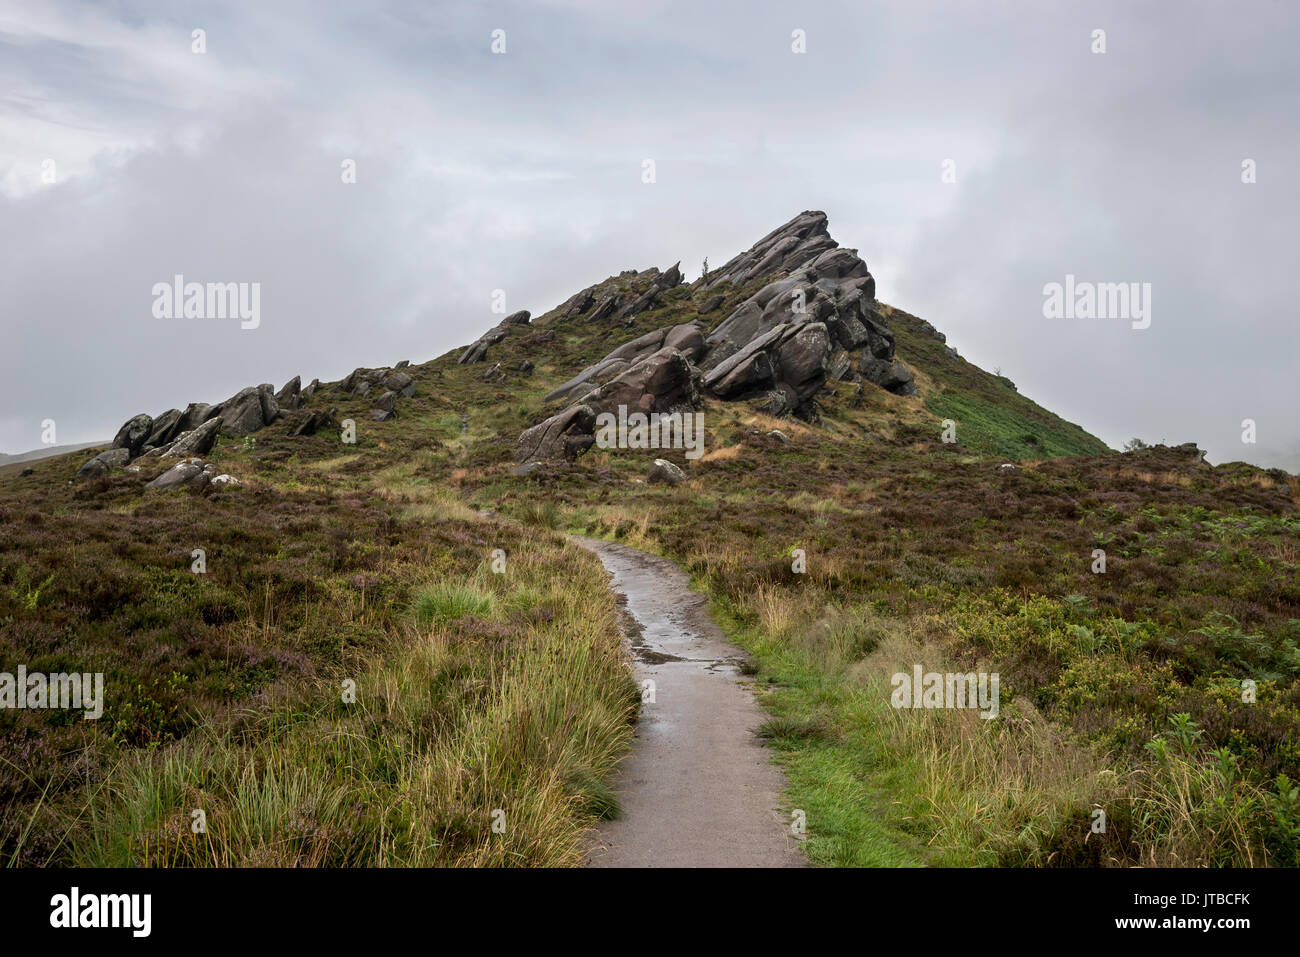 Wet weather at Ramshaw rocks near The Roaches in the Peak District national park, Staffordshire, England. Stock Photo